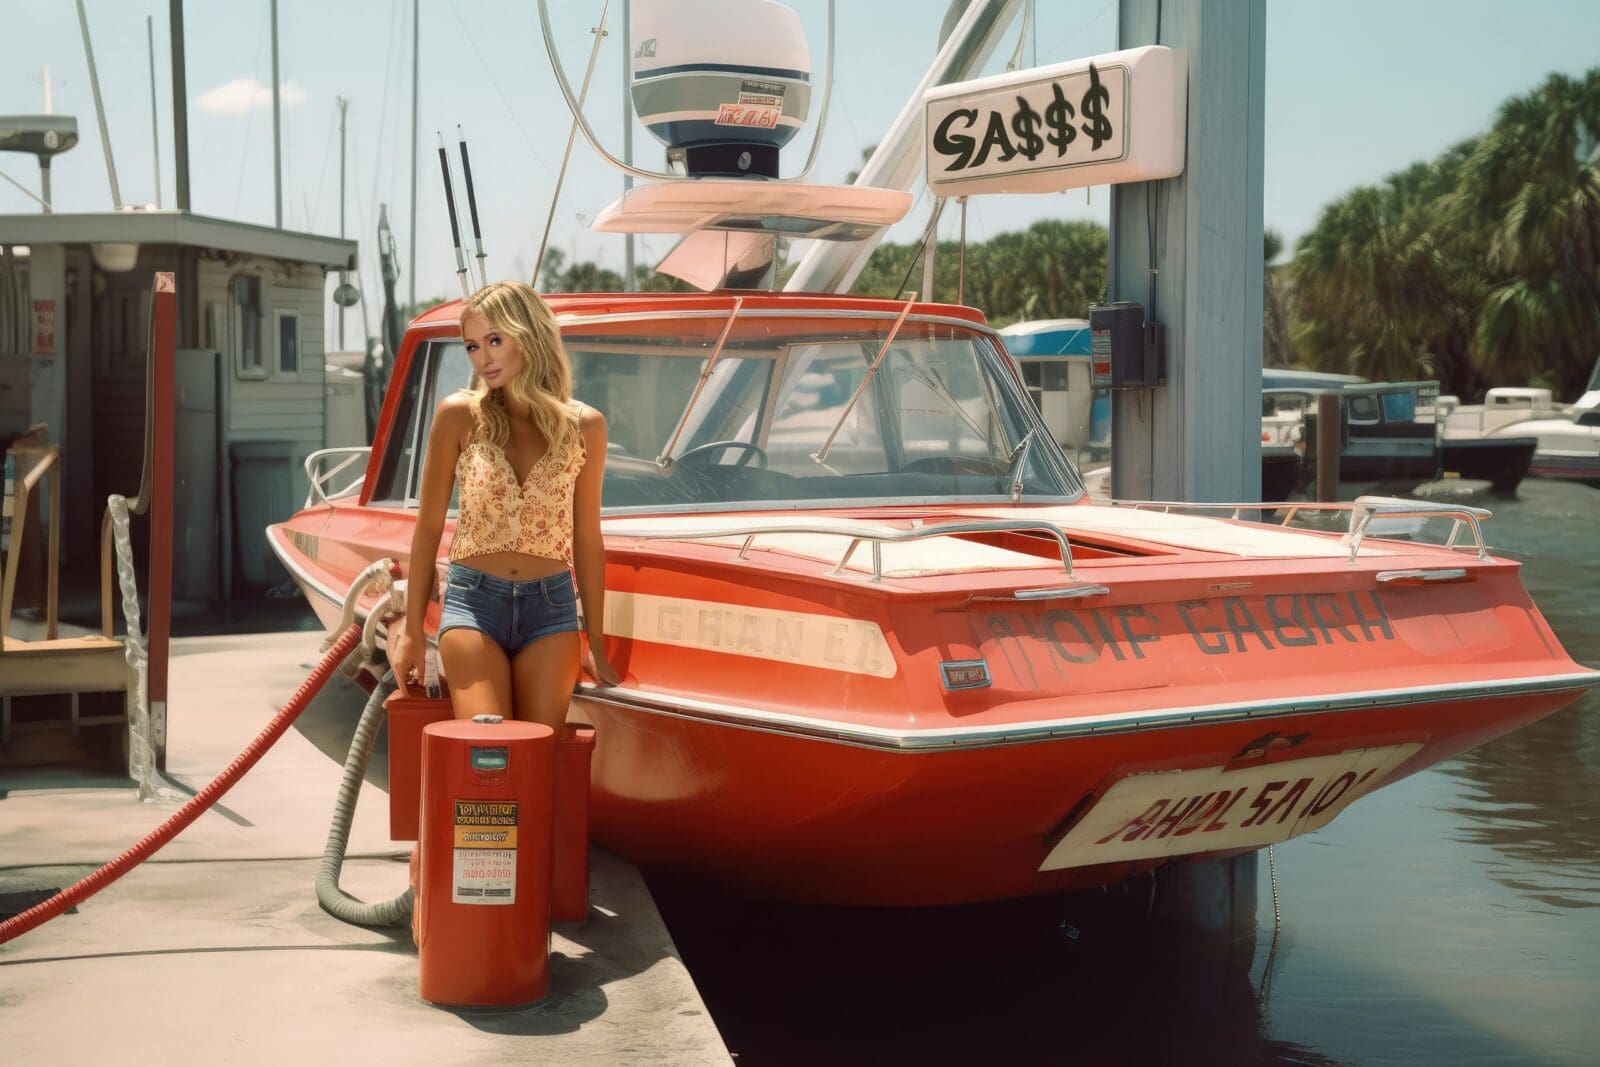 college-girl-pumping-gas-into-fishing-boat-fuel-cost-high-efficiency-for-web-scaled